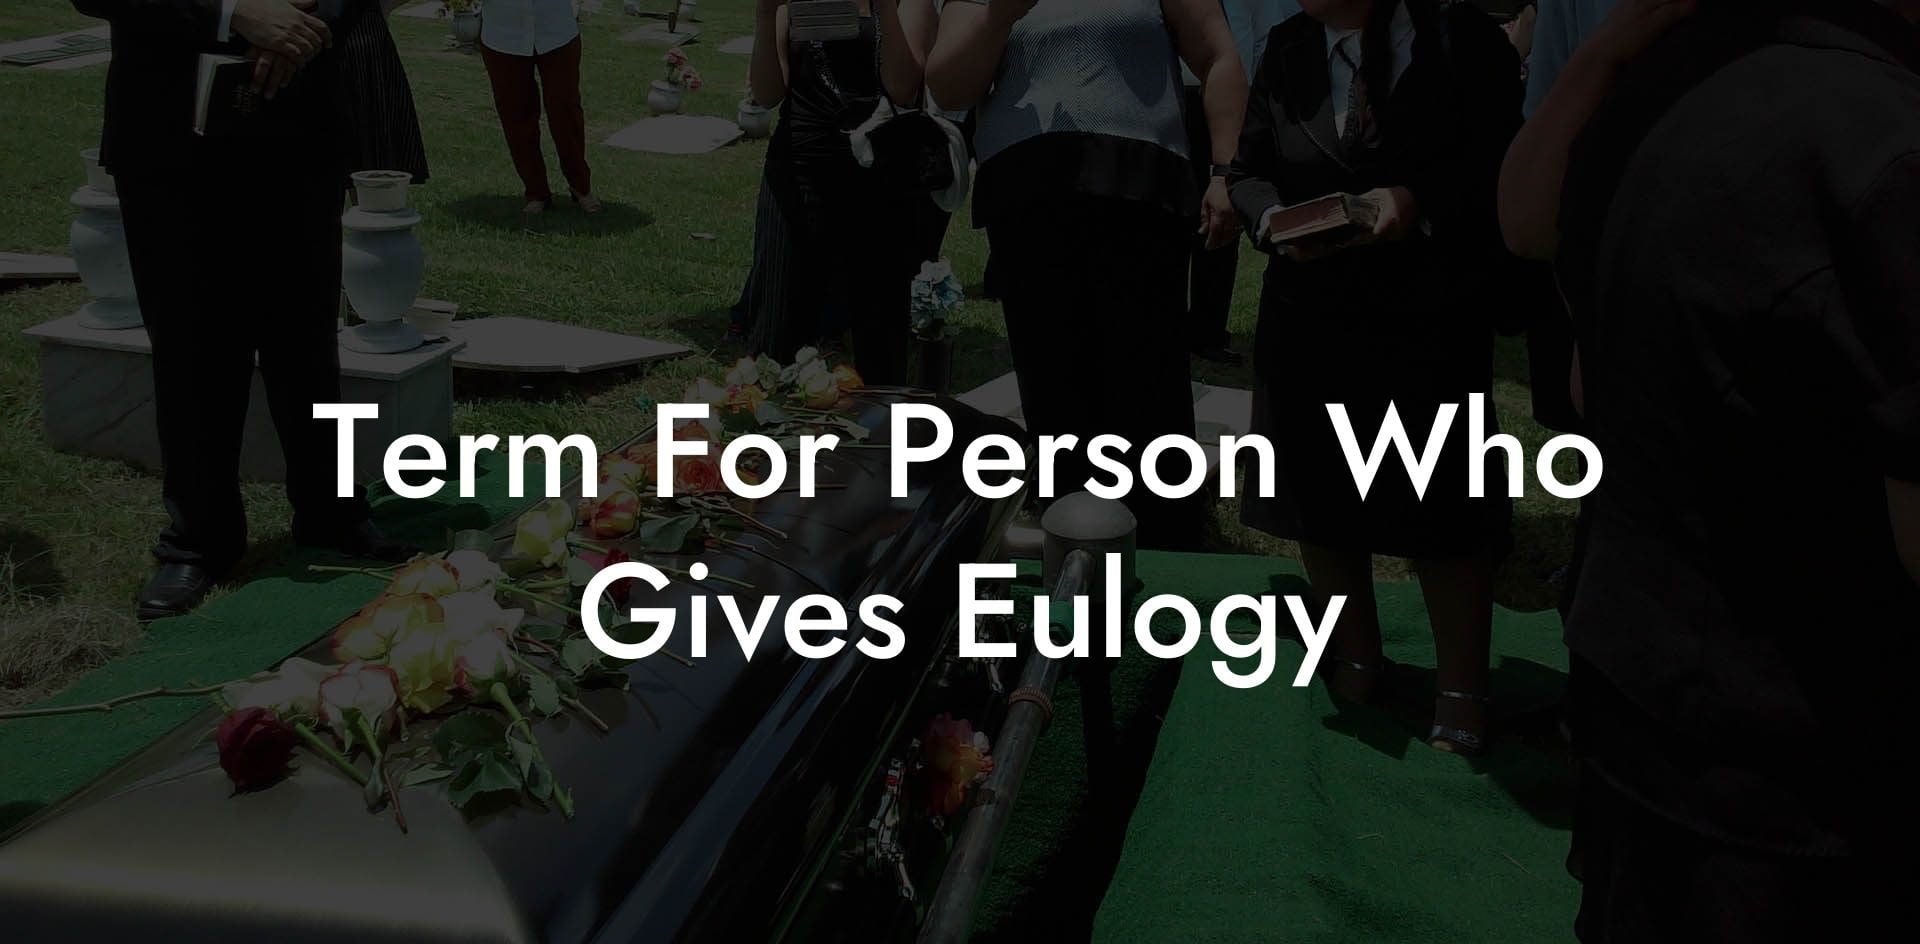 Term For Person Who Gives Eulogy